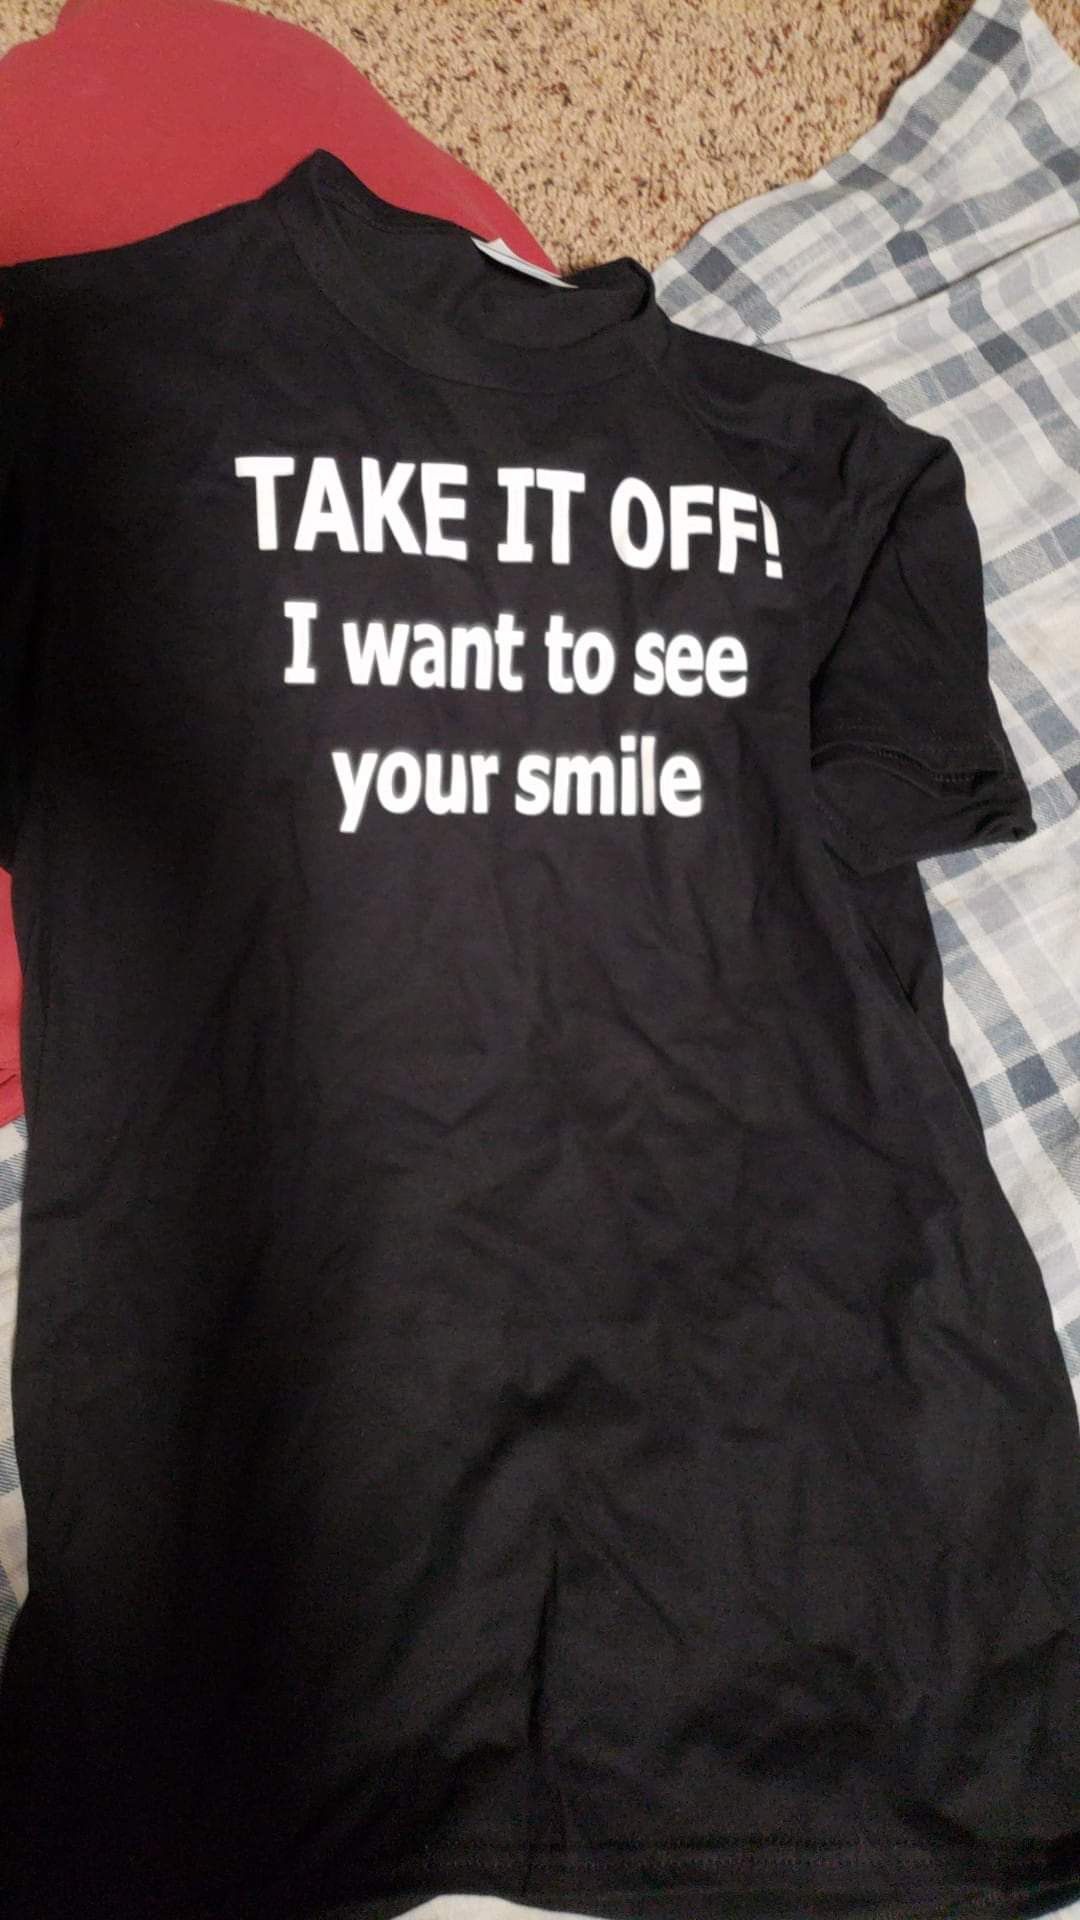 TAKE OFF YOUR MASK protest shirt